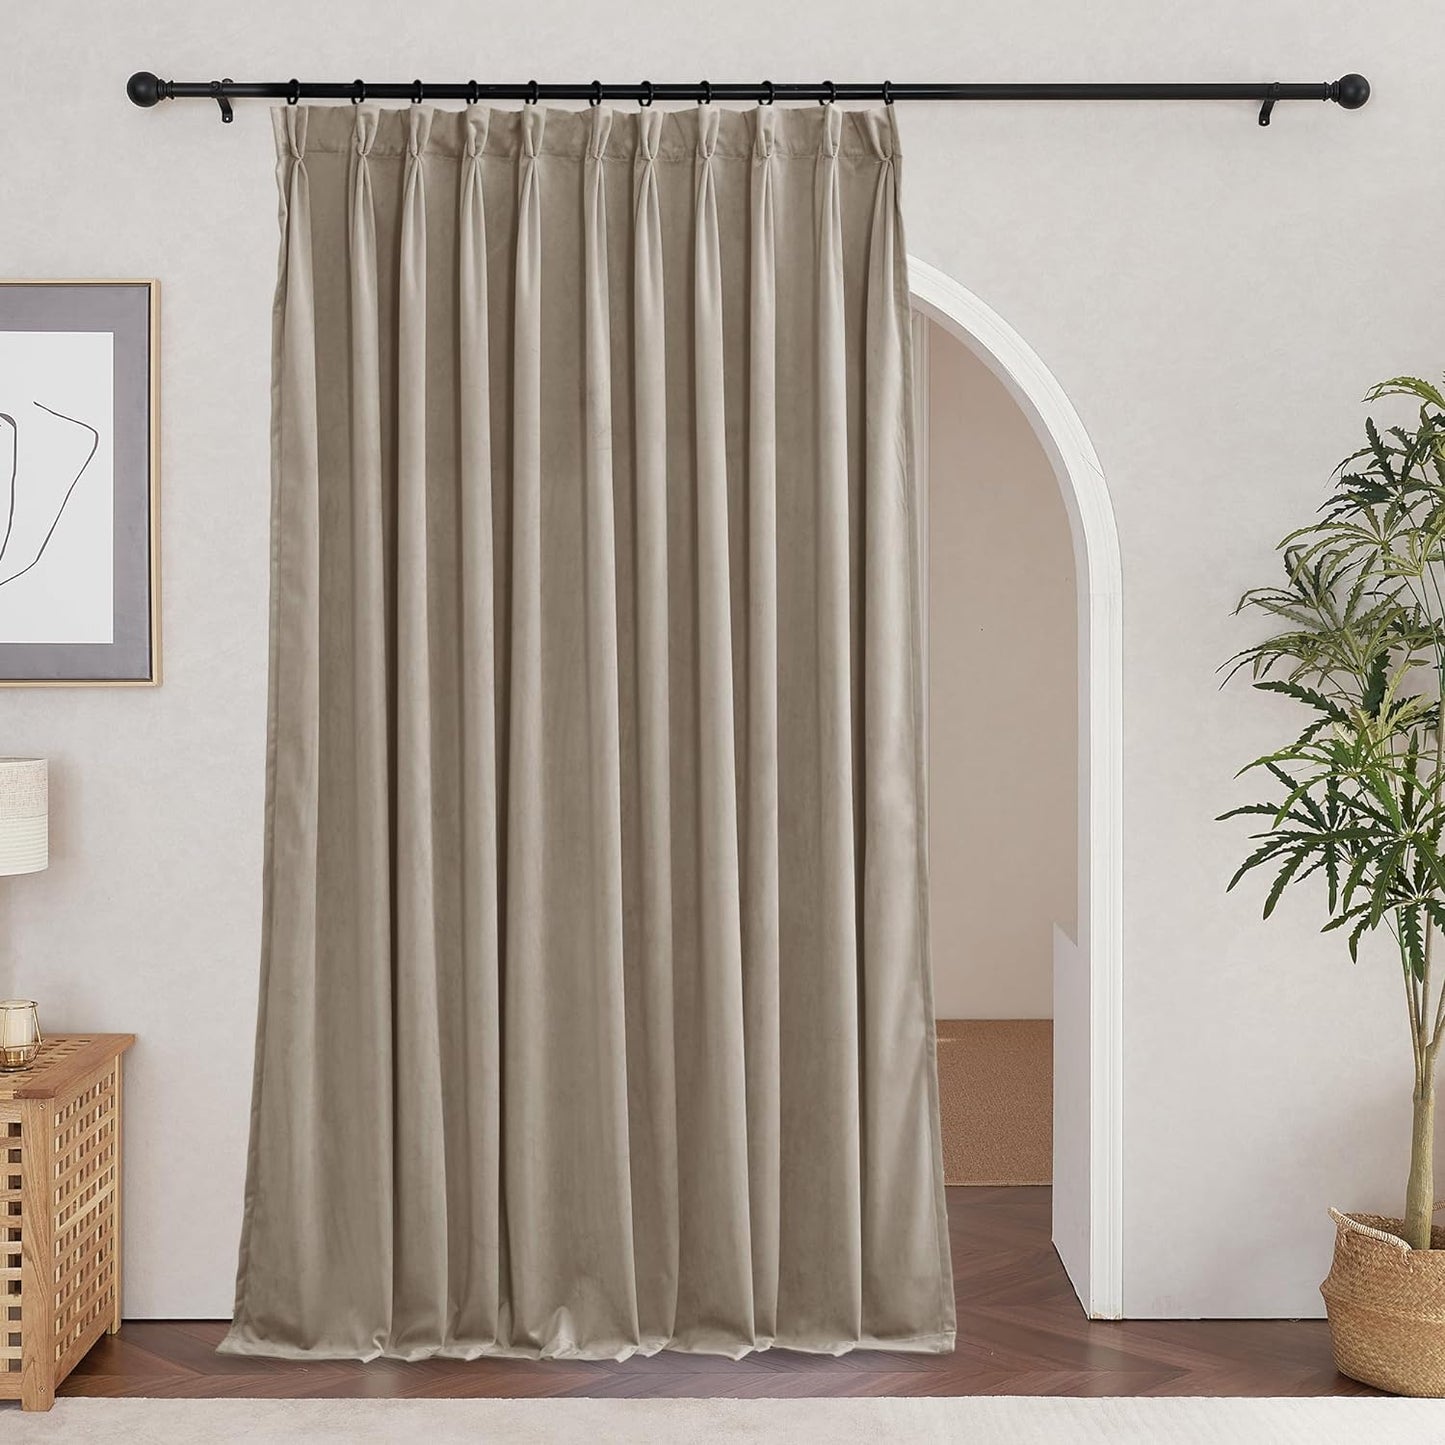 RYB HOME Velvet Curtains 84 Inches 2 Panels Set, Pinch Pleated Room Darkening Thermal Insulated Luxury Decor for Bedroom Parlor Nursery, Camel Beige, W66 X L108 Inches  RYB HOME   